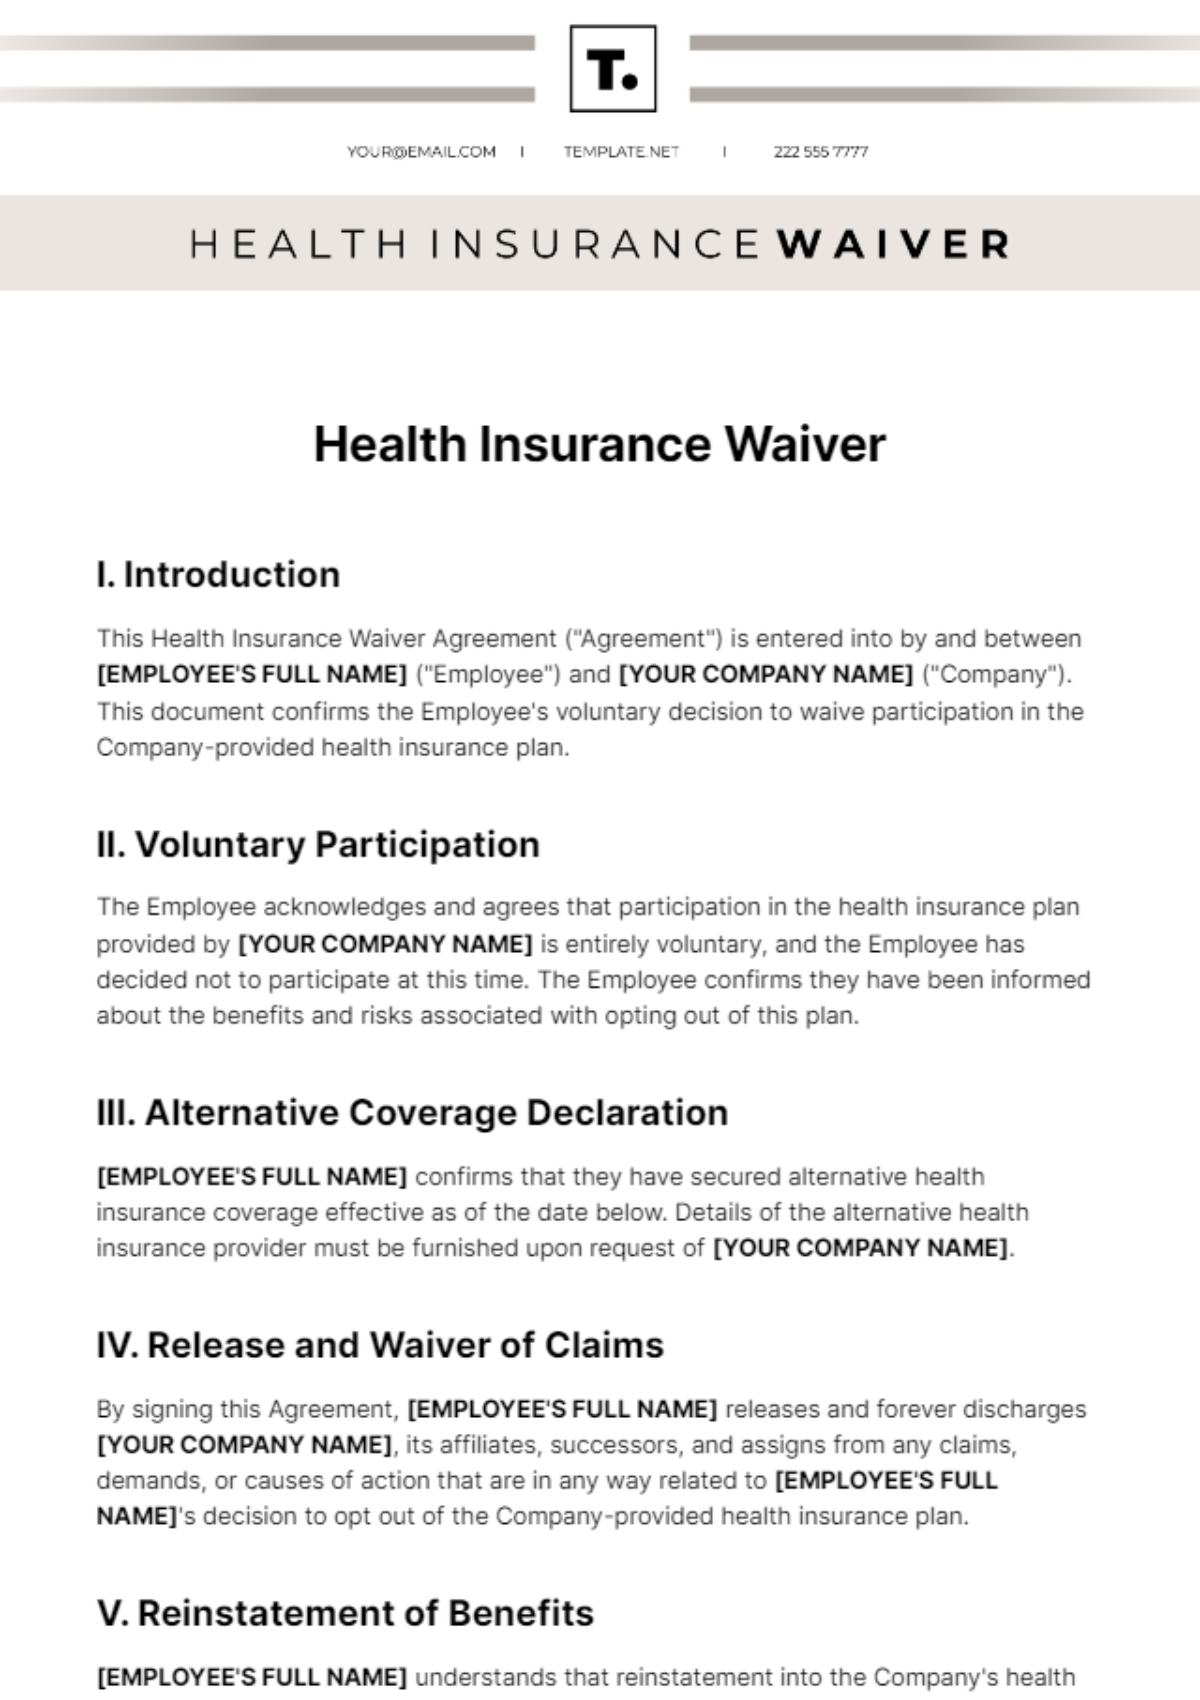 Health Insurance Waiver Template